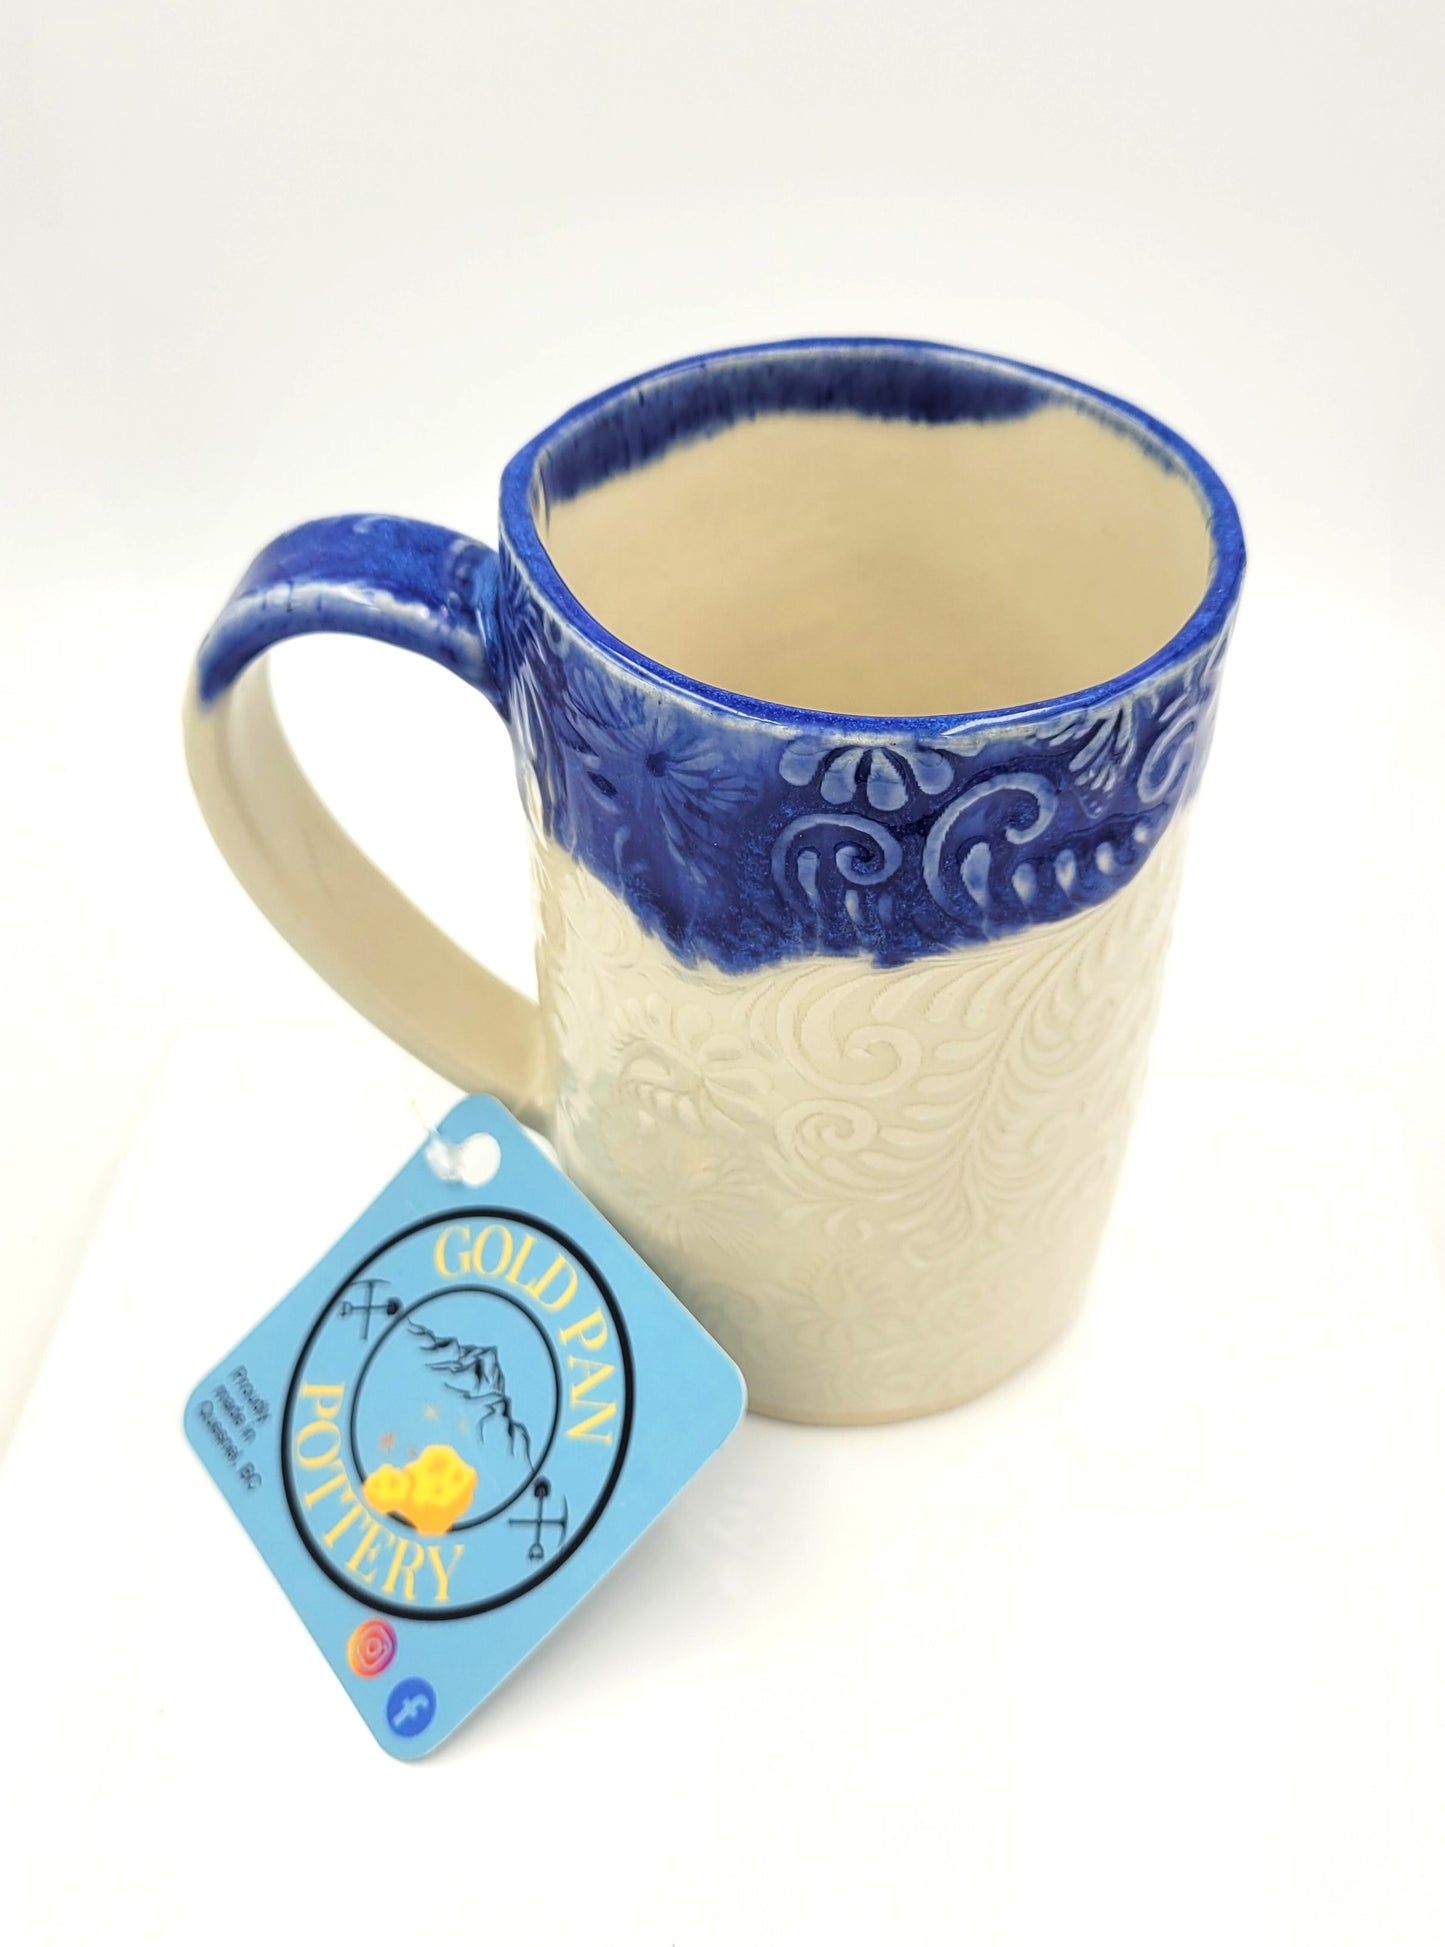 Natural white butterfly print handmade pottery mug with blue rim